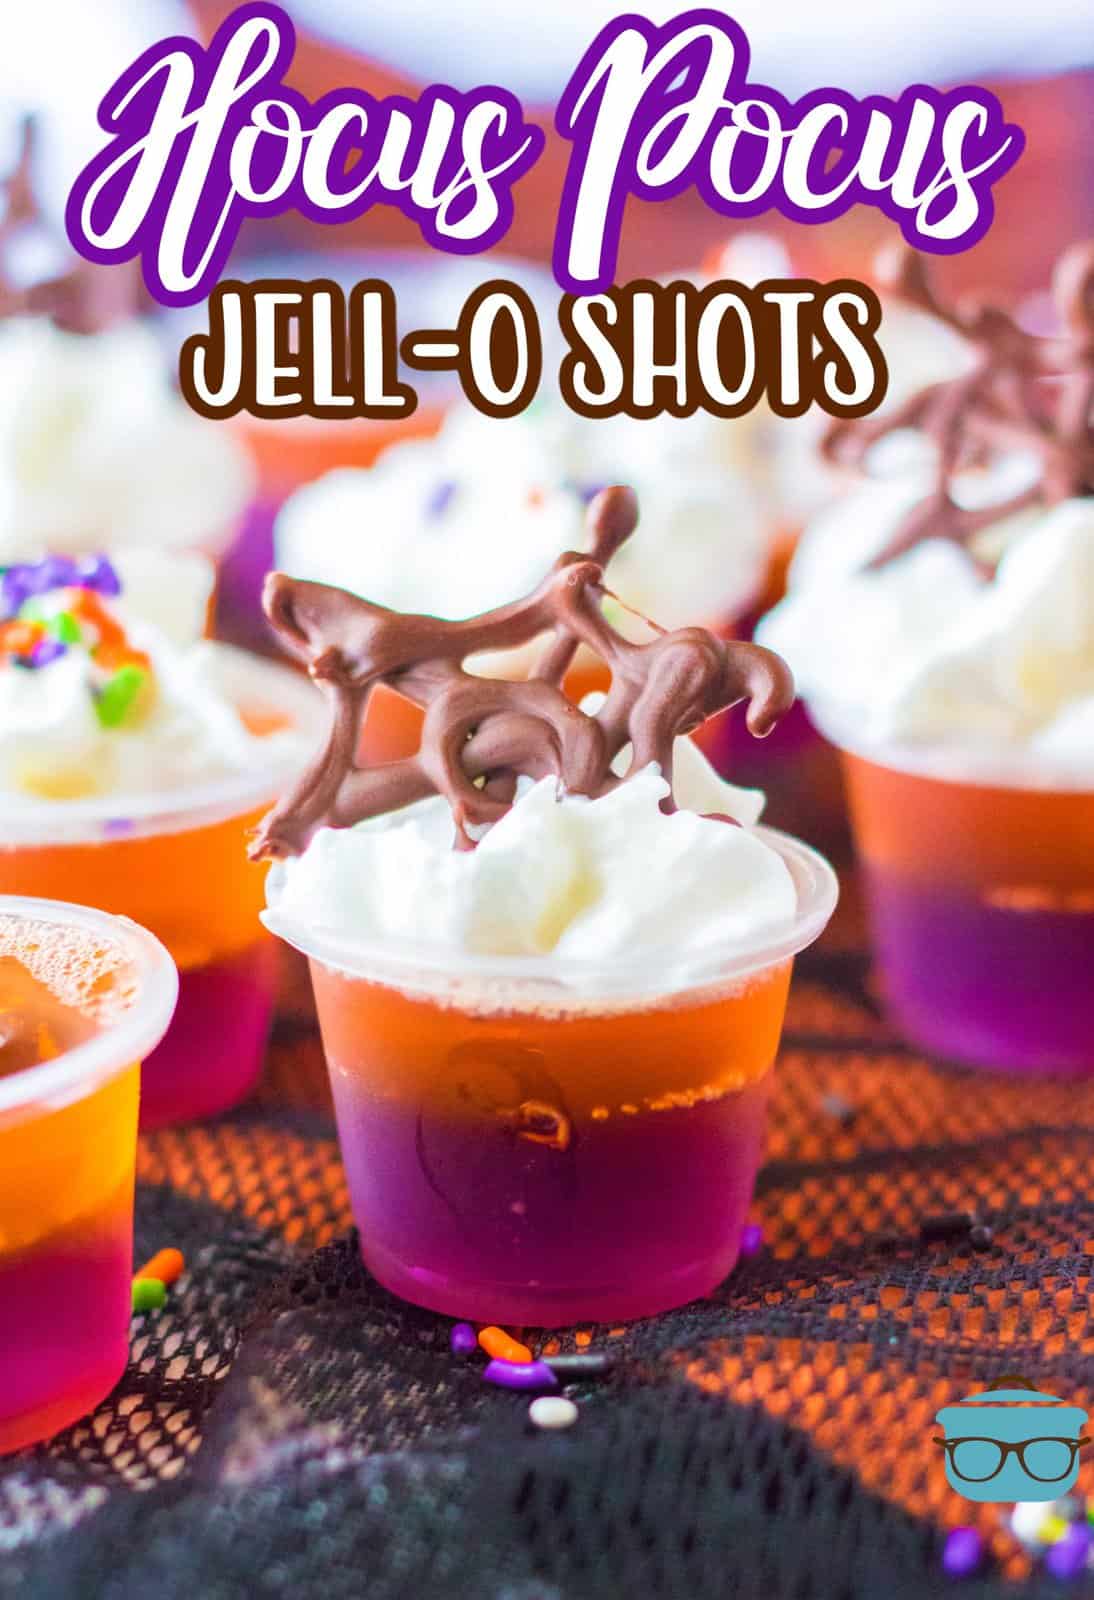 Pinterest image of finished and decorated Hocus Pocus Jell-O Shots on black lace.